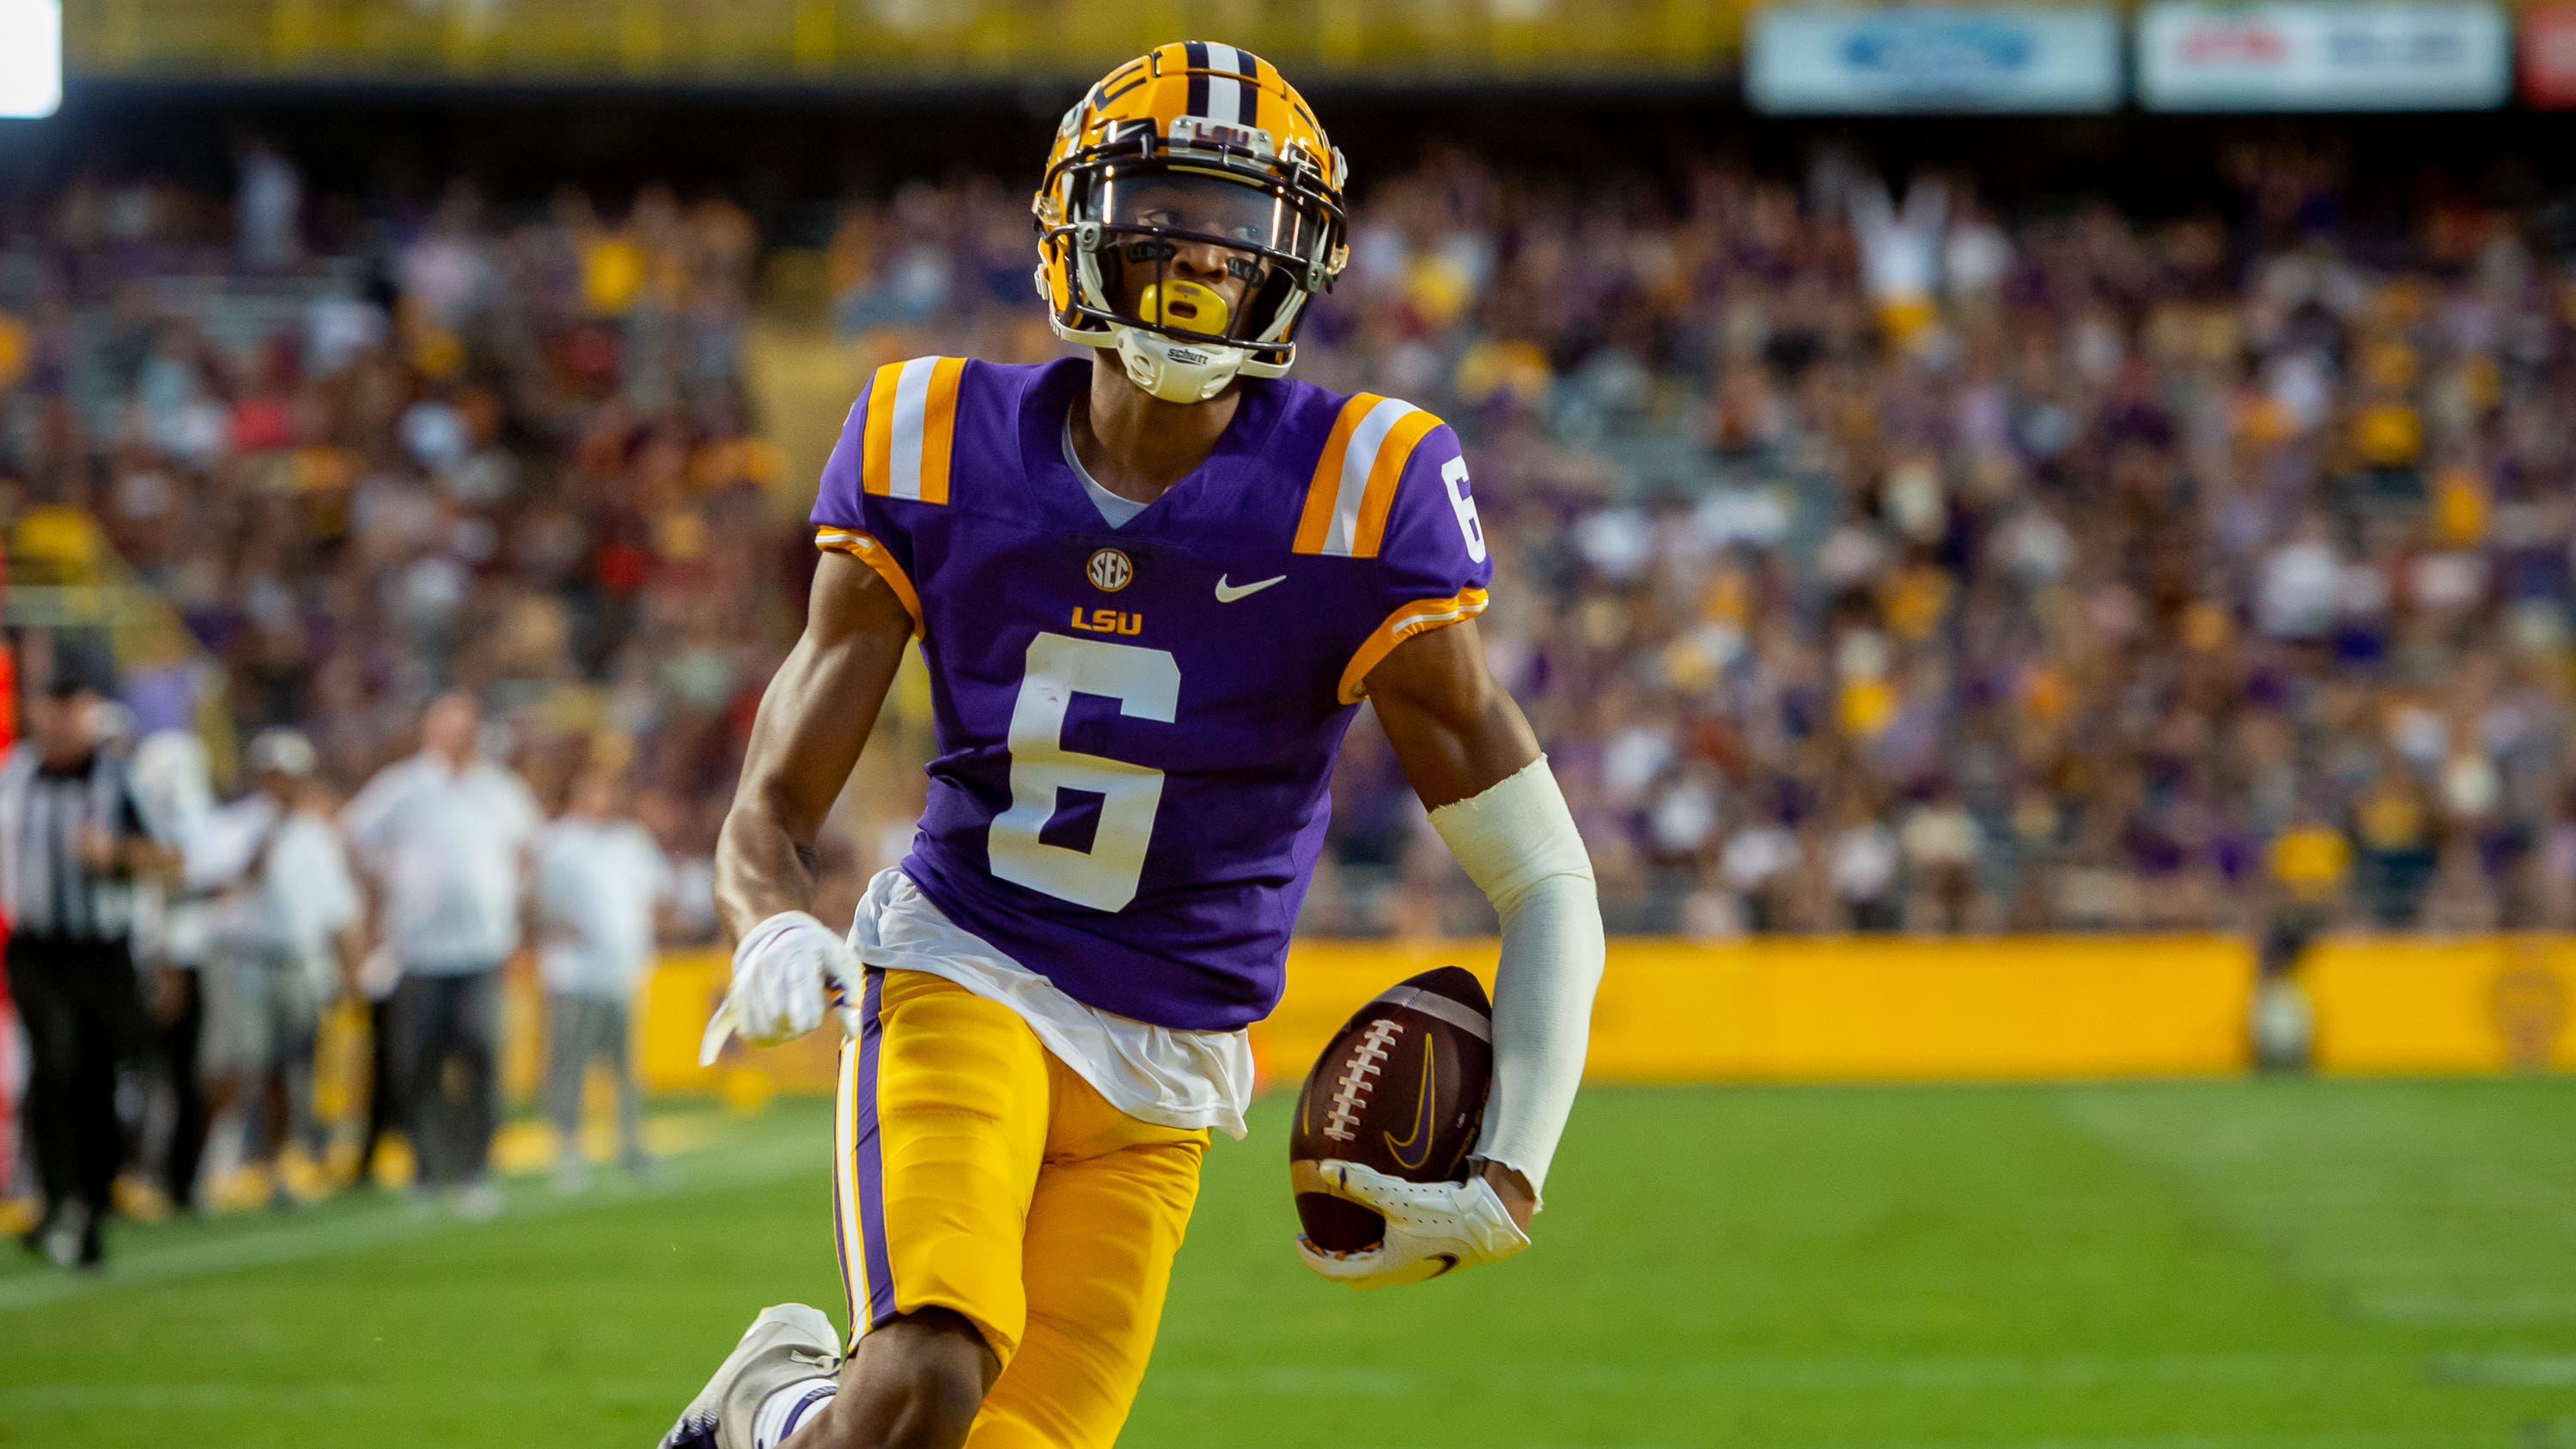 How to watch LSU vs. Mississippi State football on TV and live stream